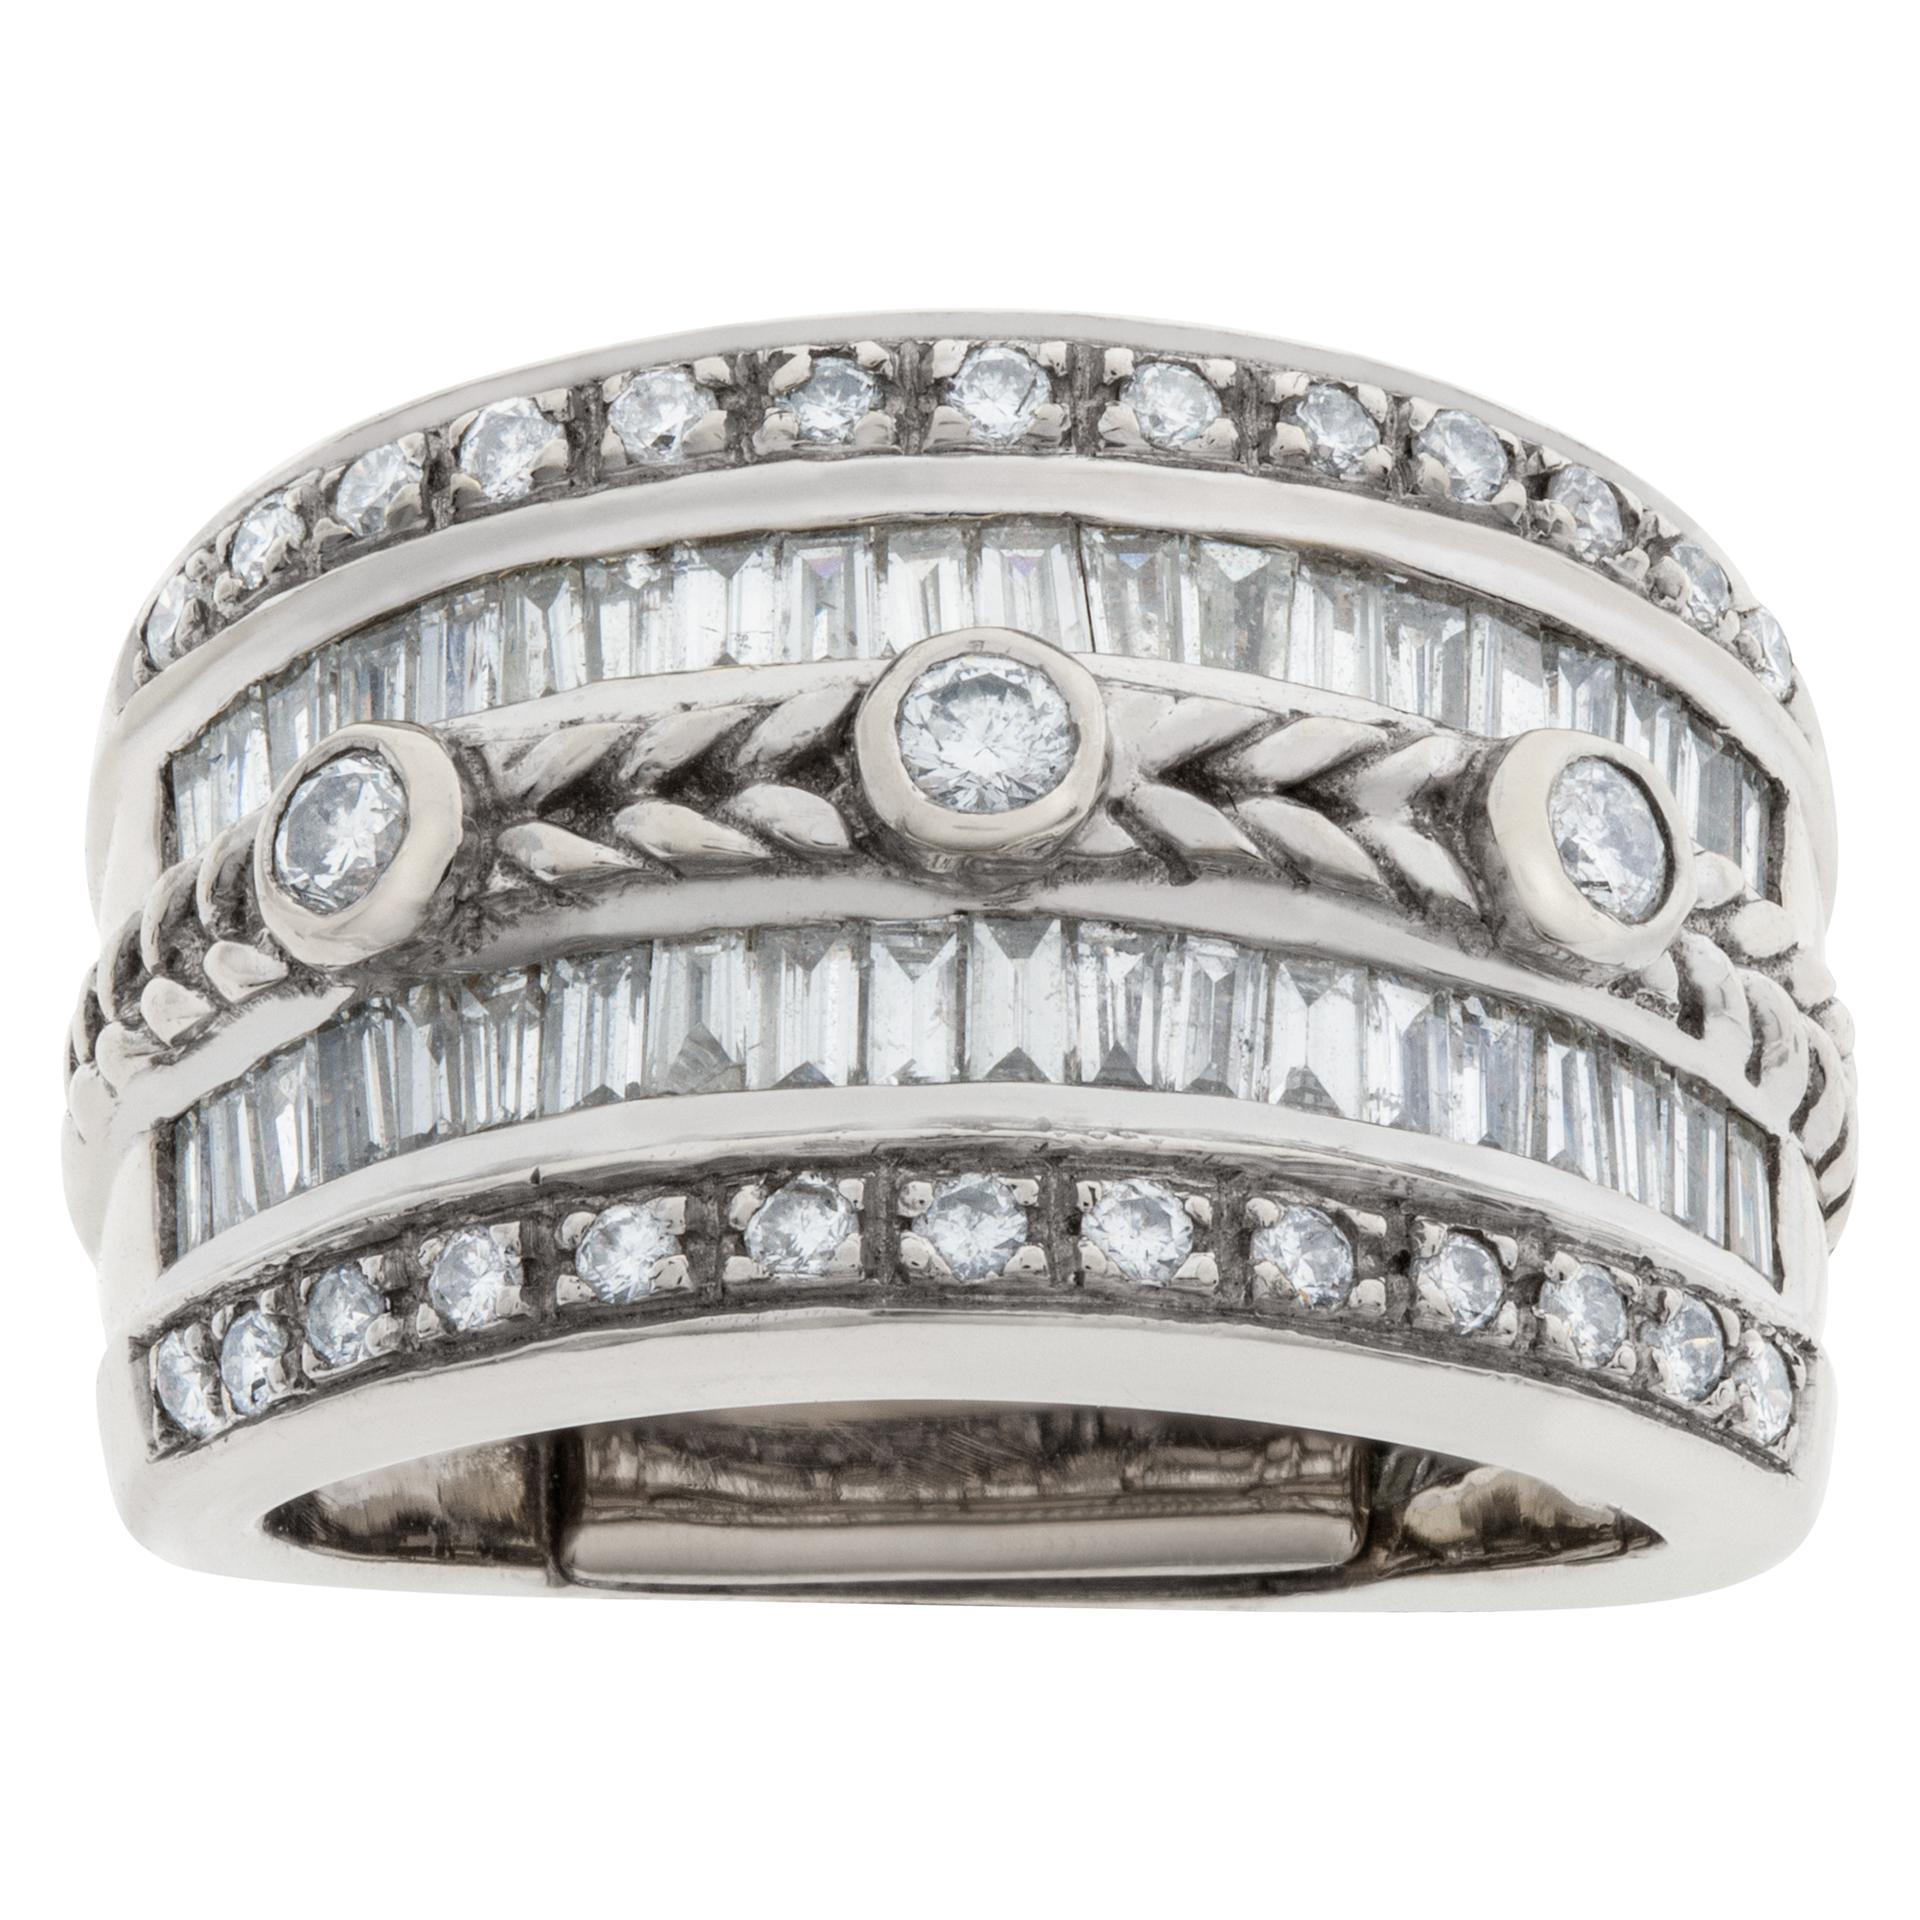 Beautiful 18k white gold ring with app. 1.25 carats in round and baguette diamonds